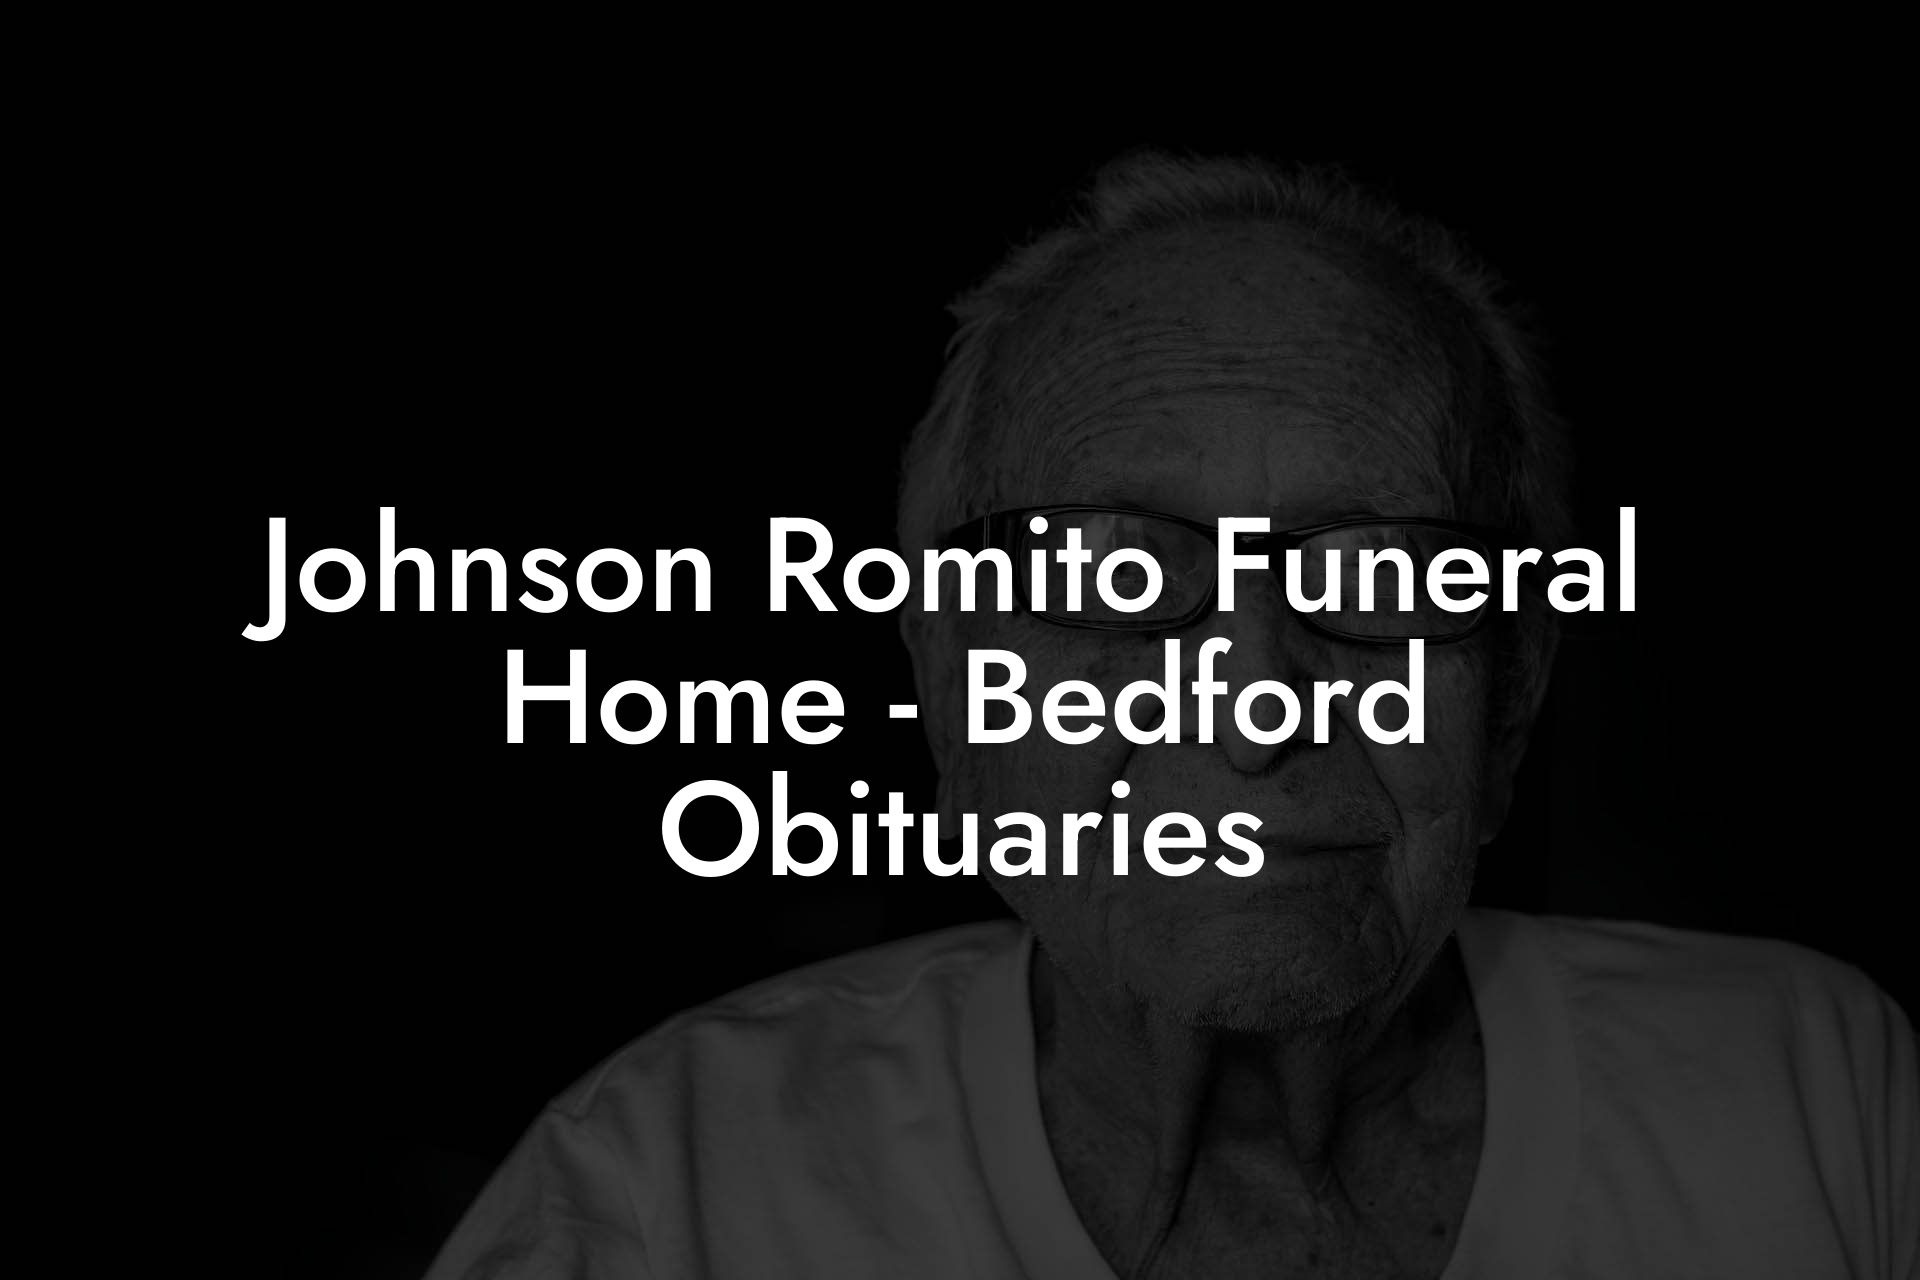 Johnson Romito Funeral Home - Bedford Obituaries